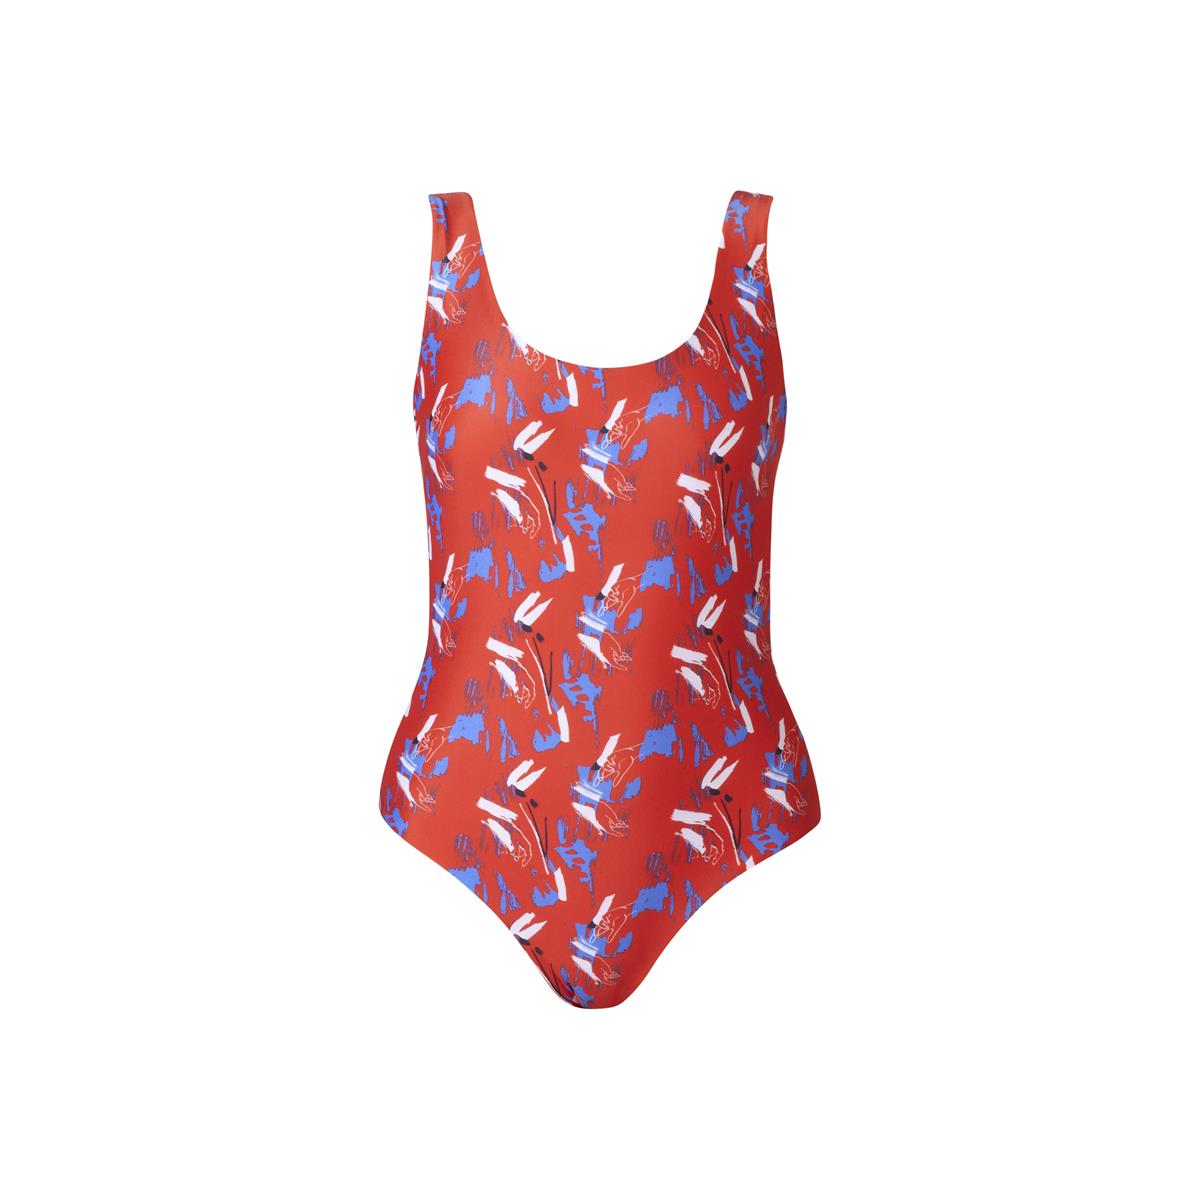 MARGARET AND HERMIONE_SS18_Swimsuit No.5_hands_EUR 208,00